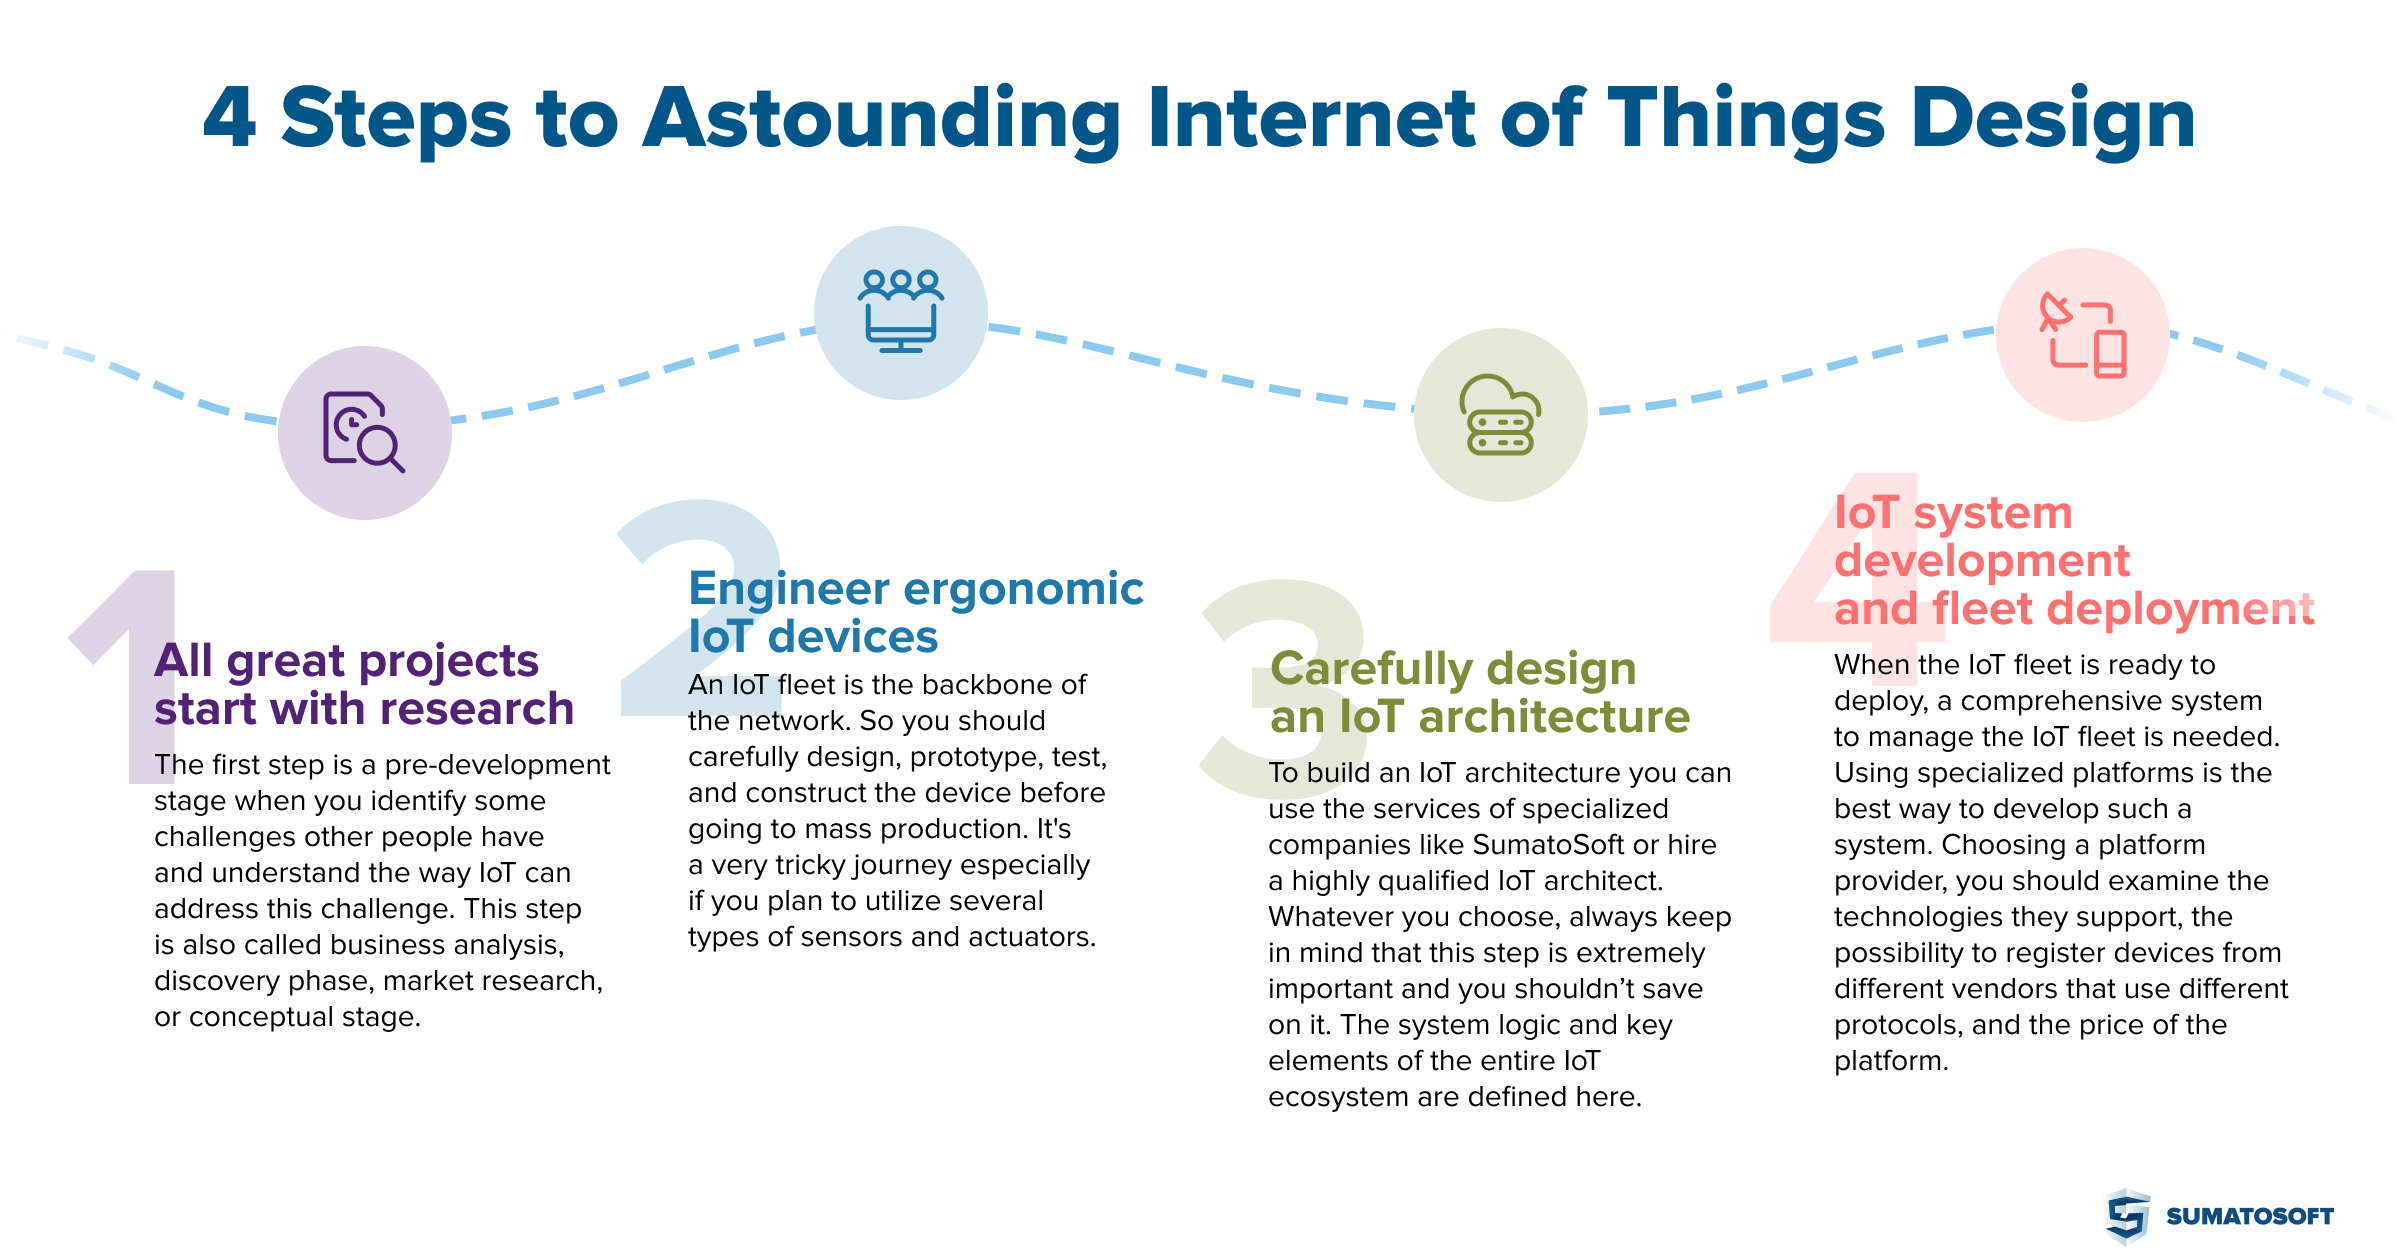 4 Steps to Astounding Internet of Things Design